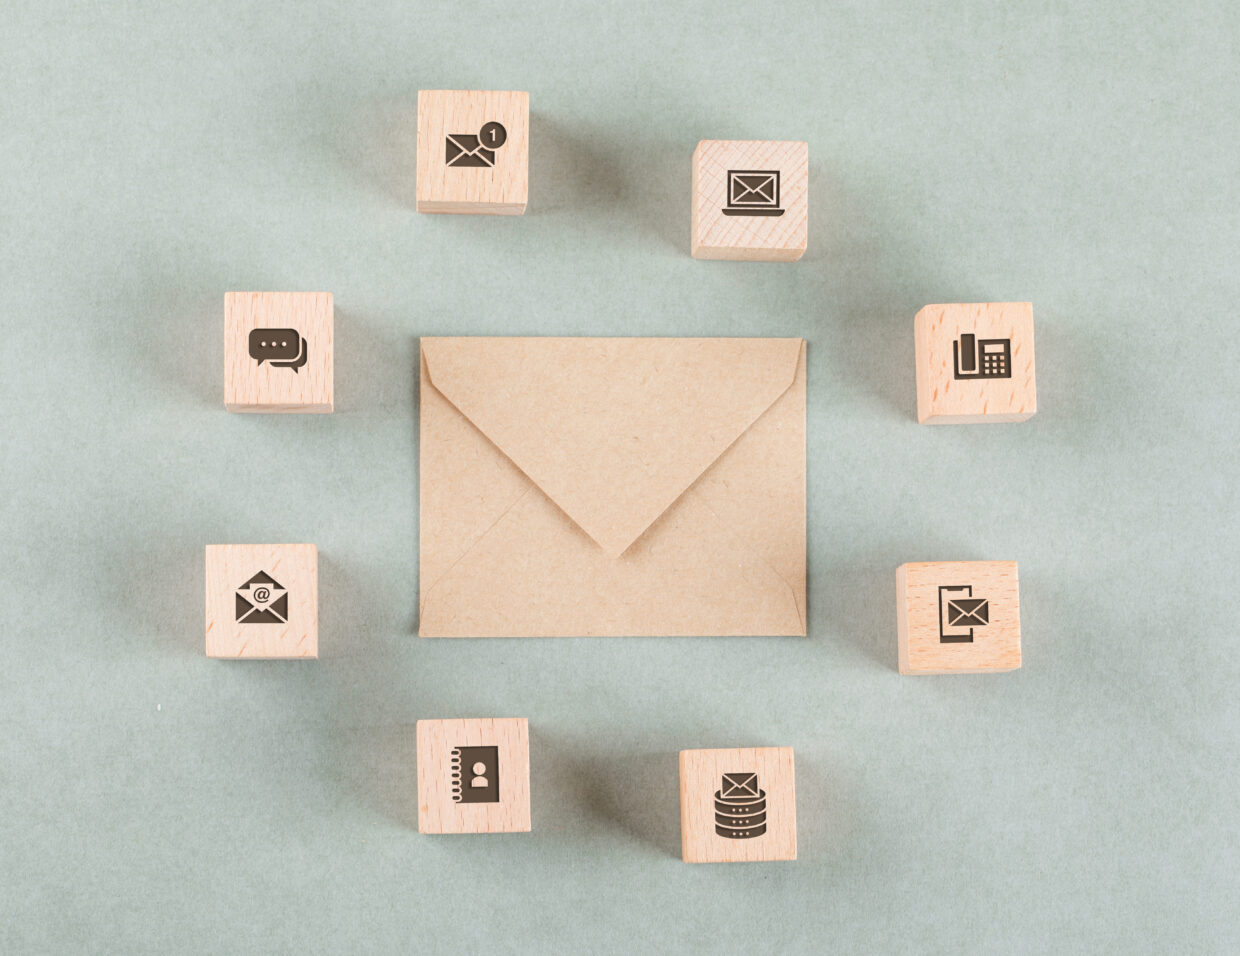 Conceptual of management with wooden cubes, envelope on sage color background flat lay. horizontal image